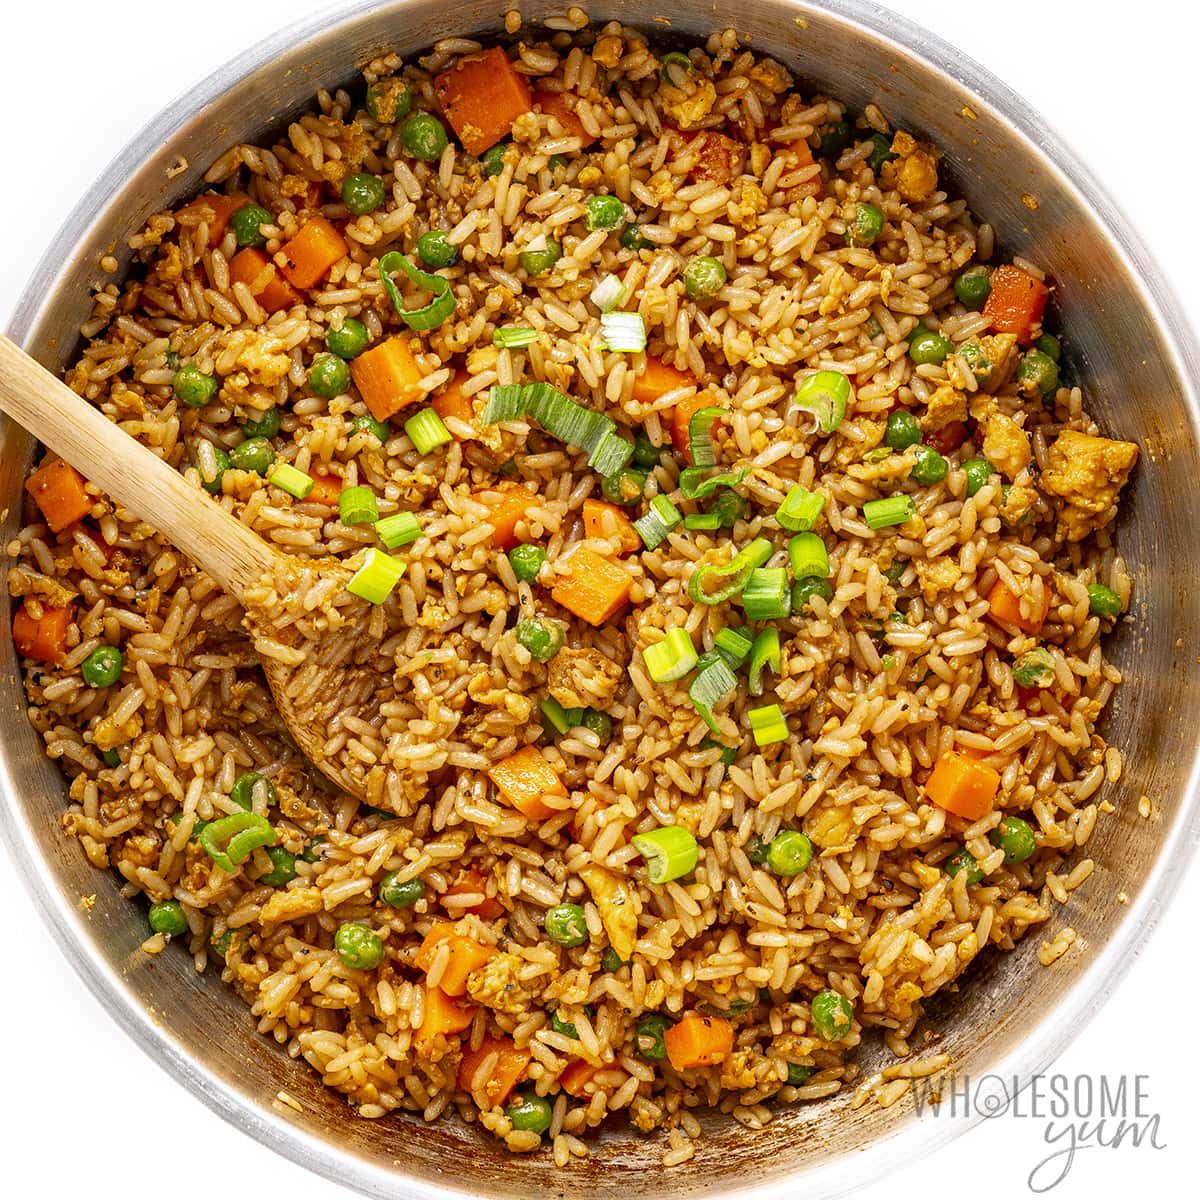 Finished easy fried rice recipe with garnish.